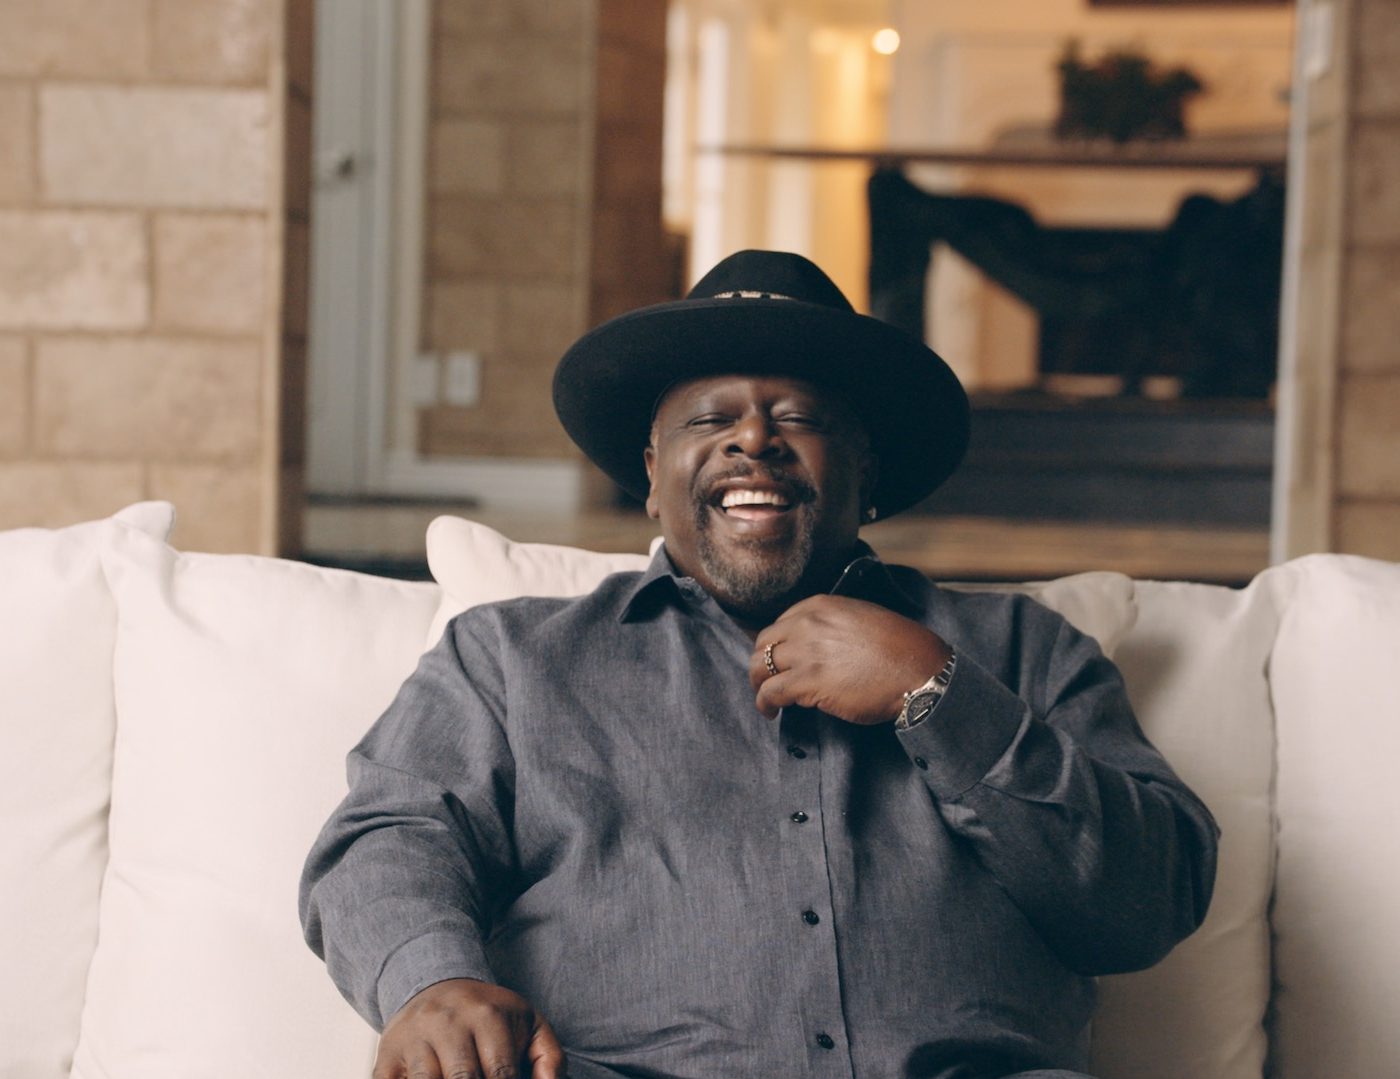 Black Pop Cedric the Entertainer headshot sitting on a white couch smiling wearing a black hat and gray shirt